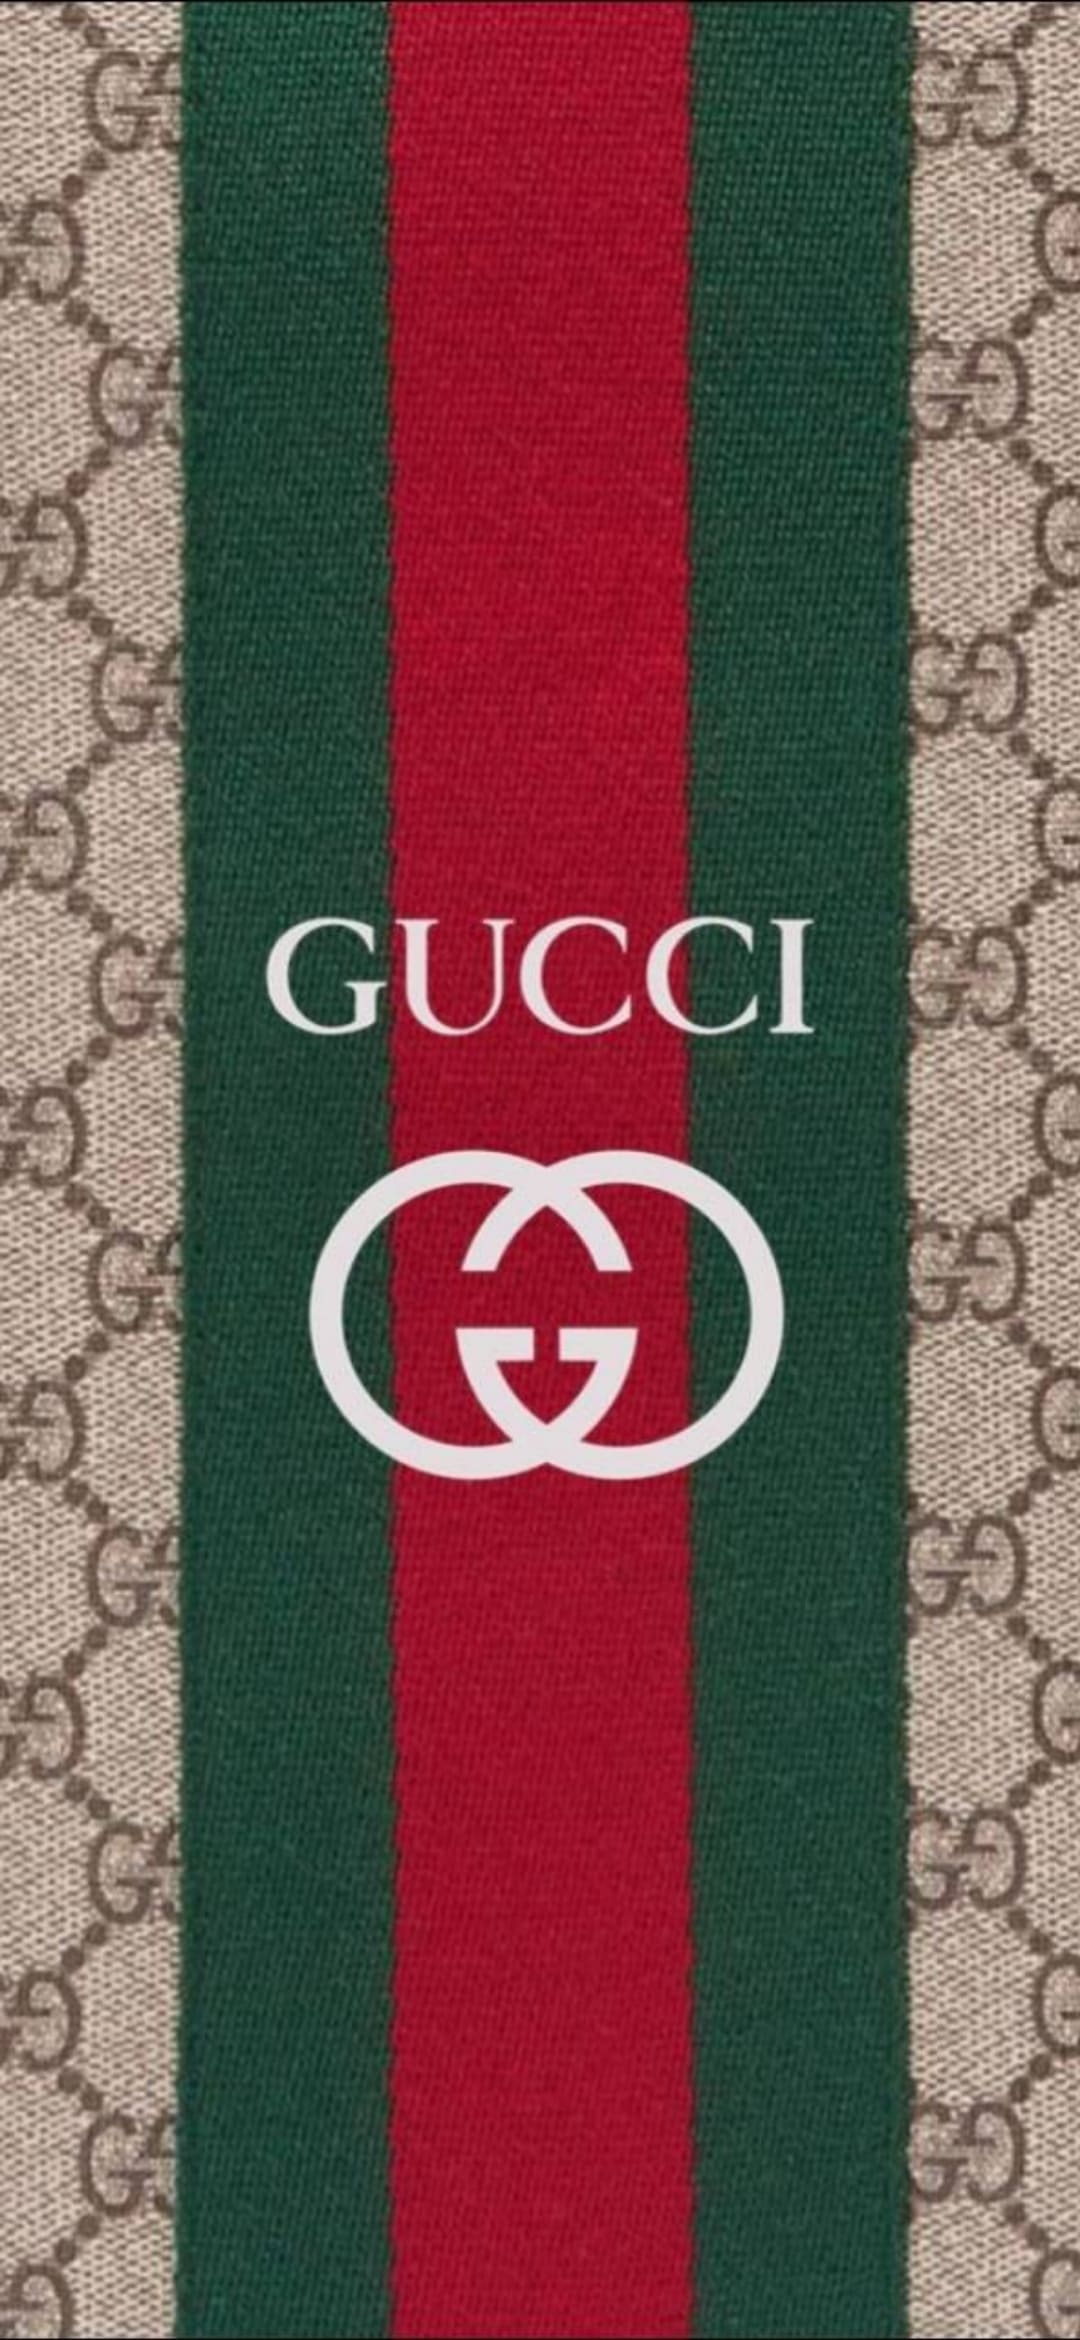 Gucci Phone Wallpaper Top Best Mobile